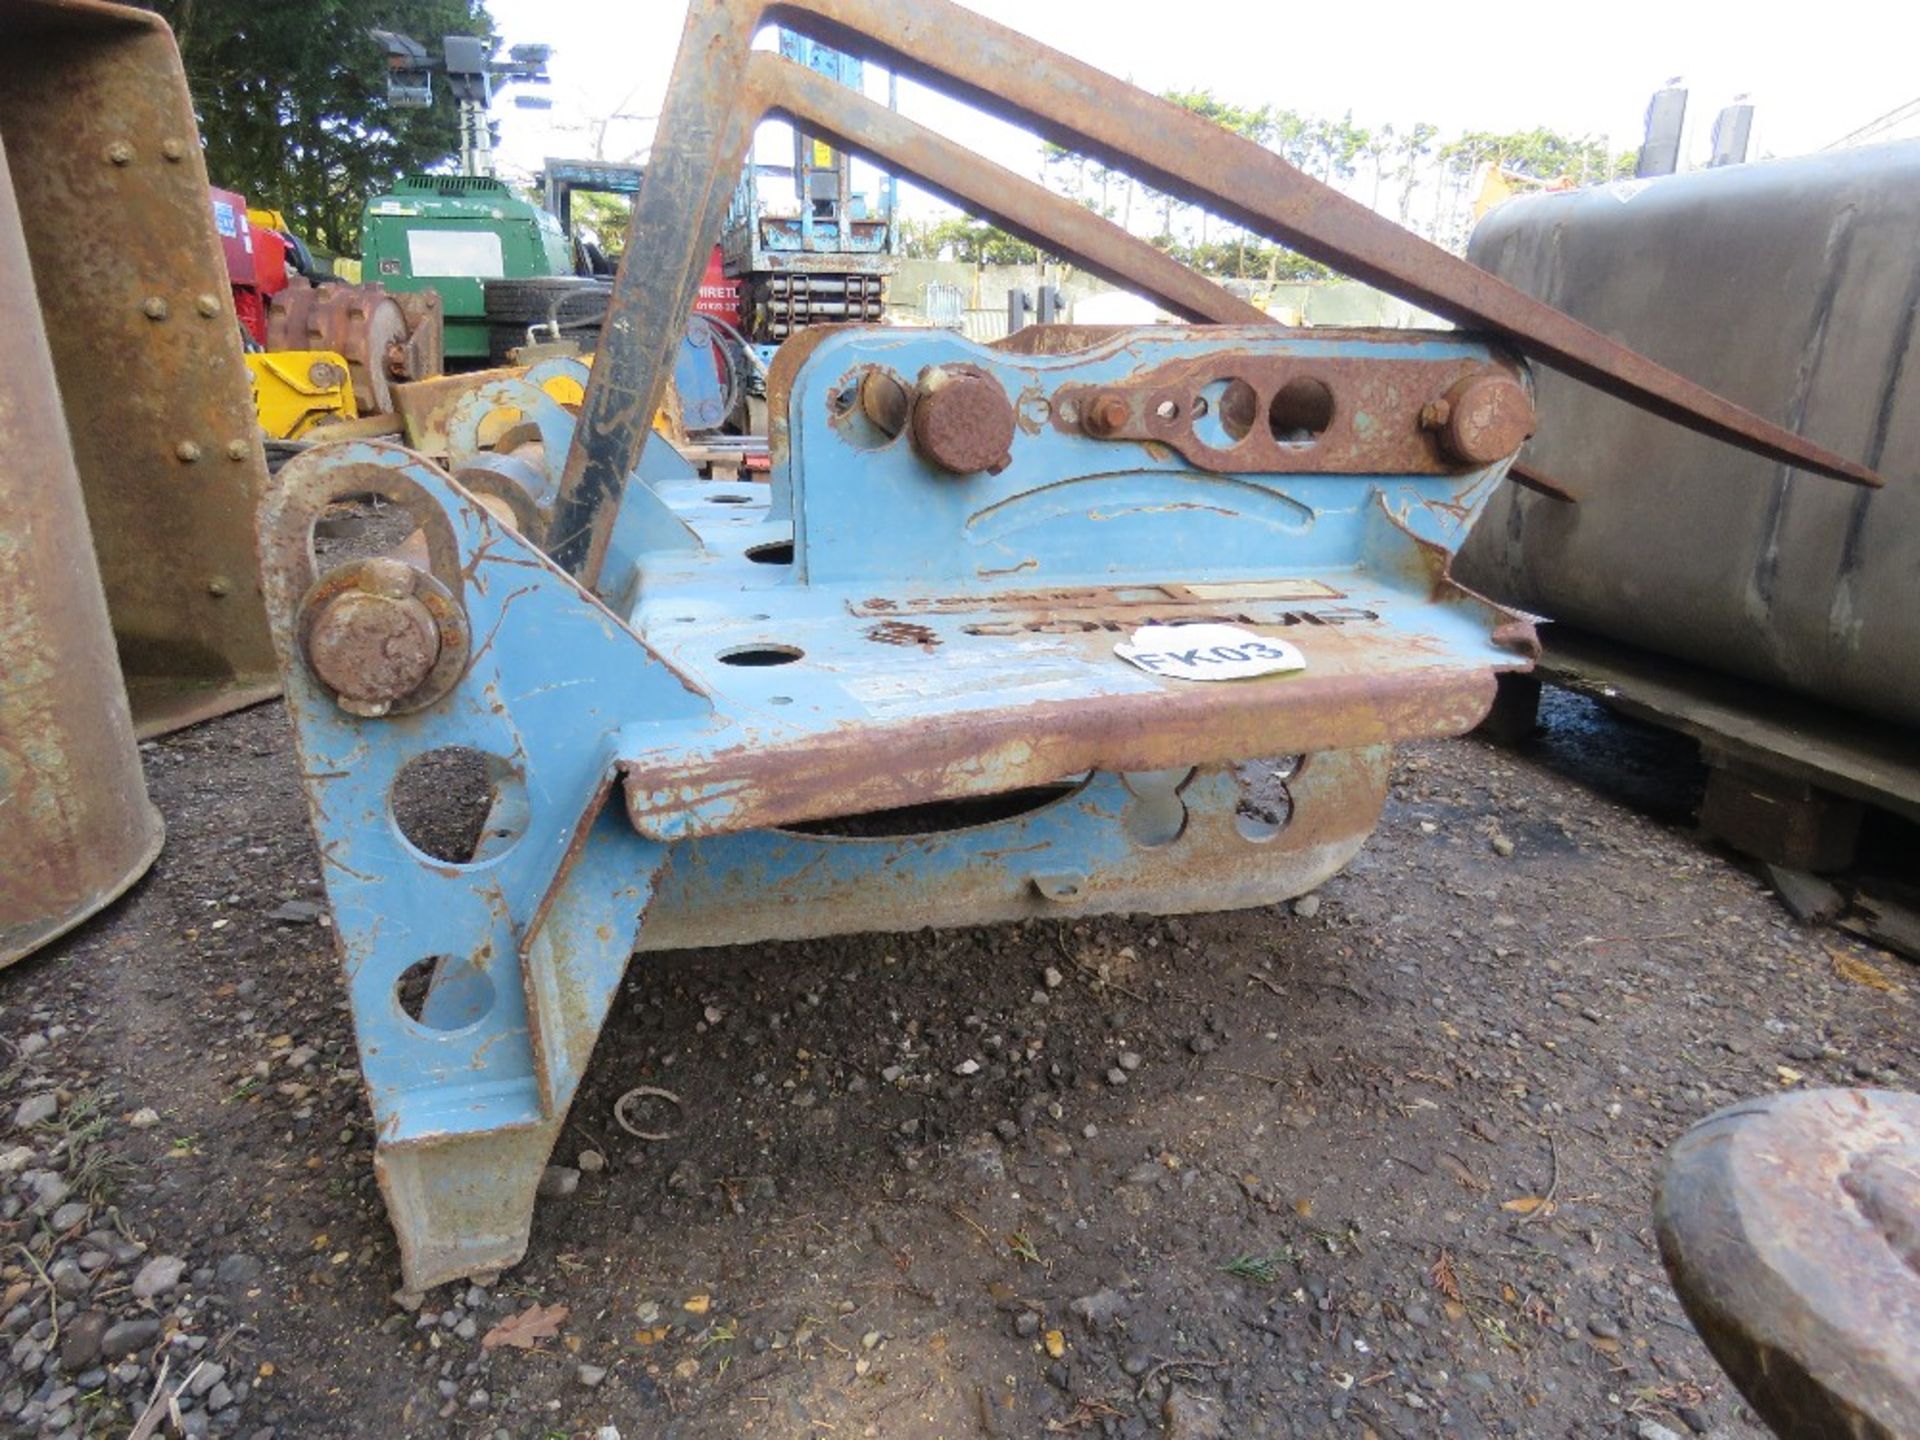 SET OF CONQUIP EXCAVATOR MOUNTED PALLET FORKS. SOURCED FROM COMPANY LIQUIDATION. - Image 4 of 6